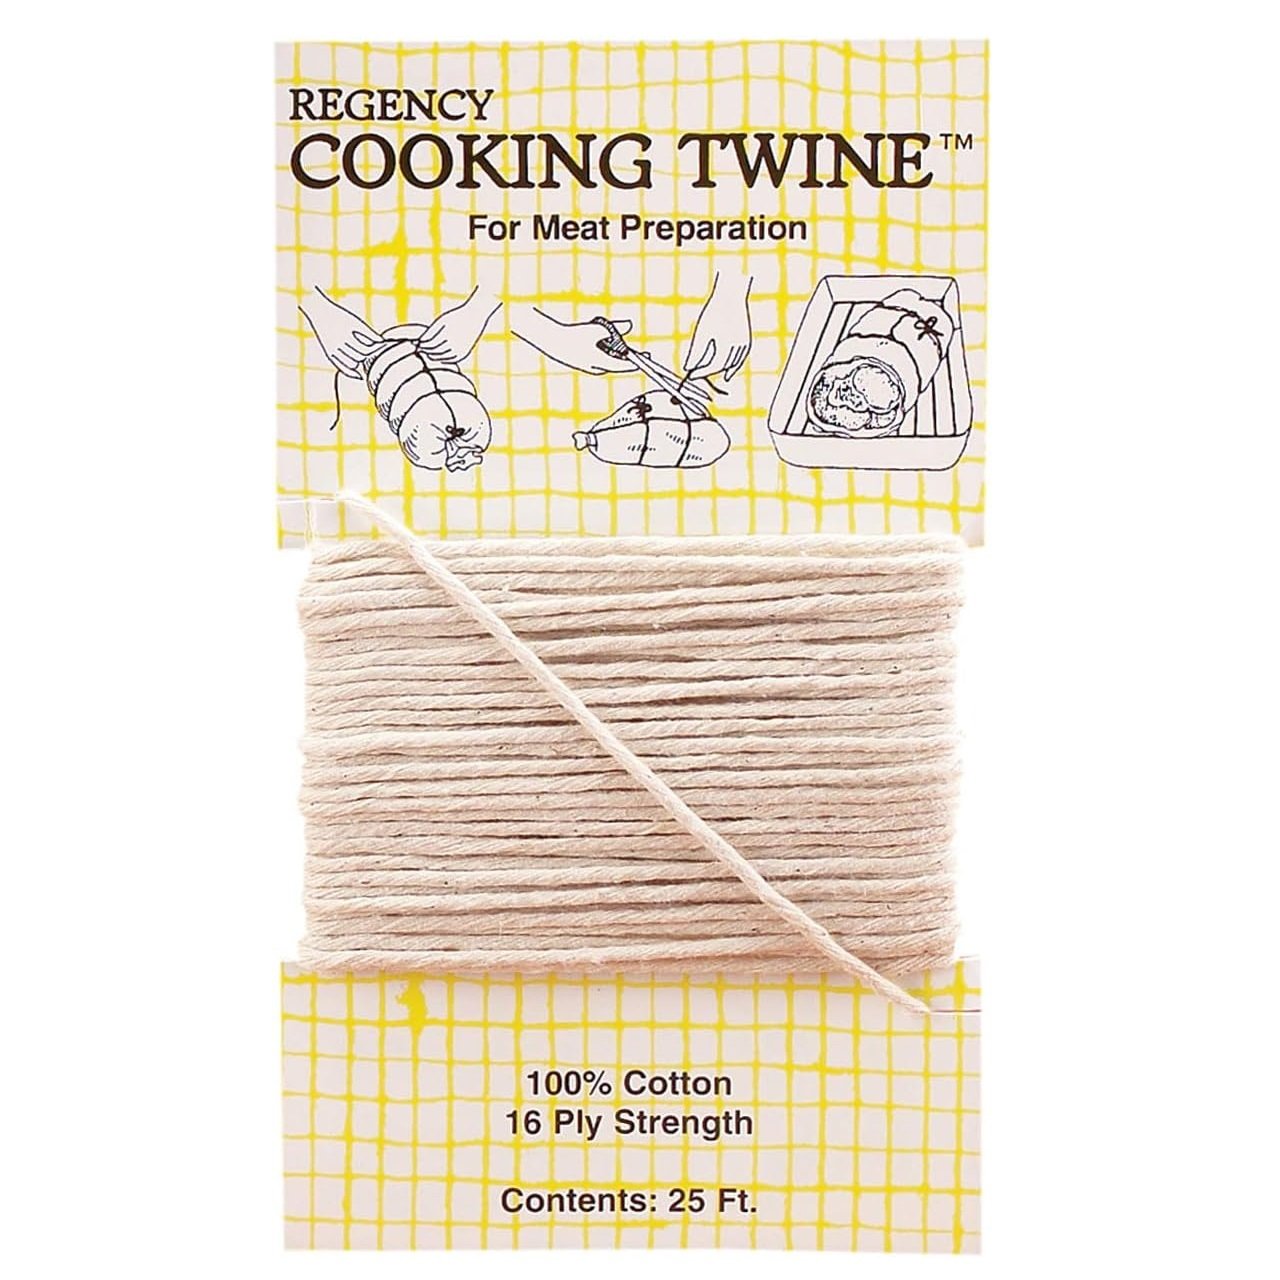 Regency 100% Cotton 25&#x27; Cooking Twine - Meat Poultry Preparation Butchers String